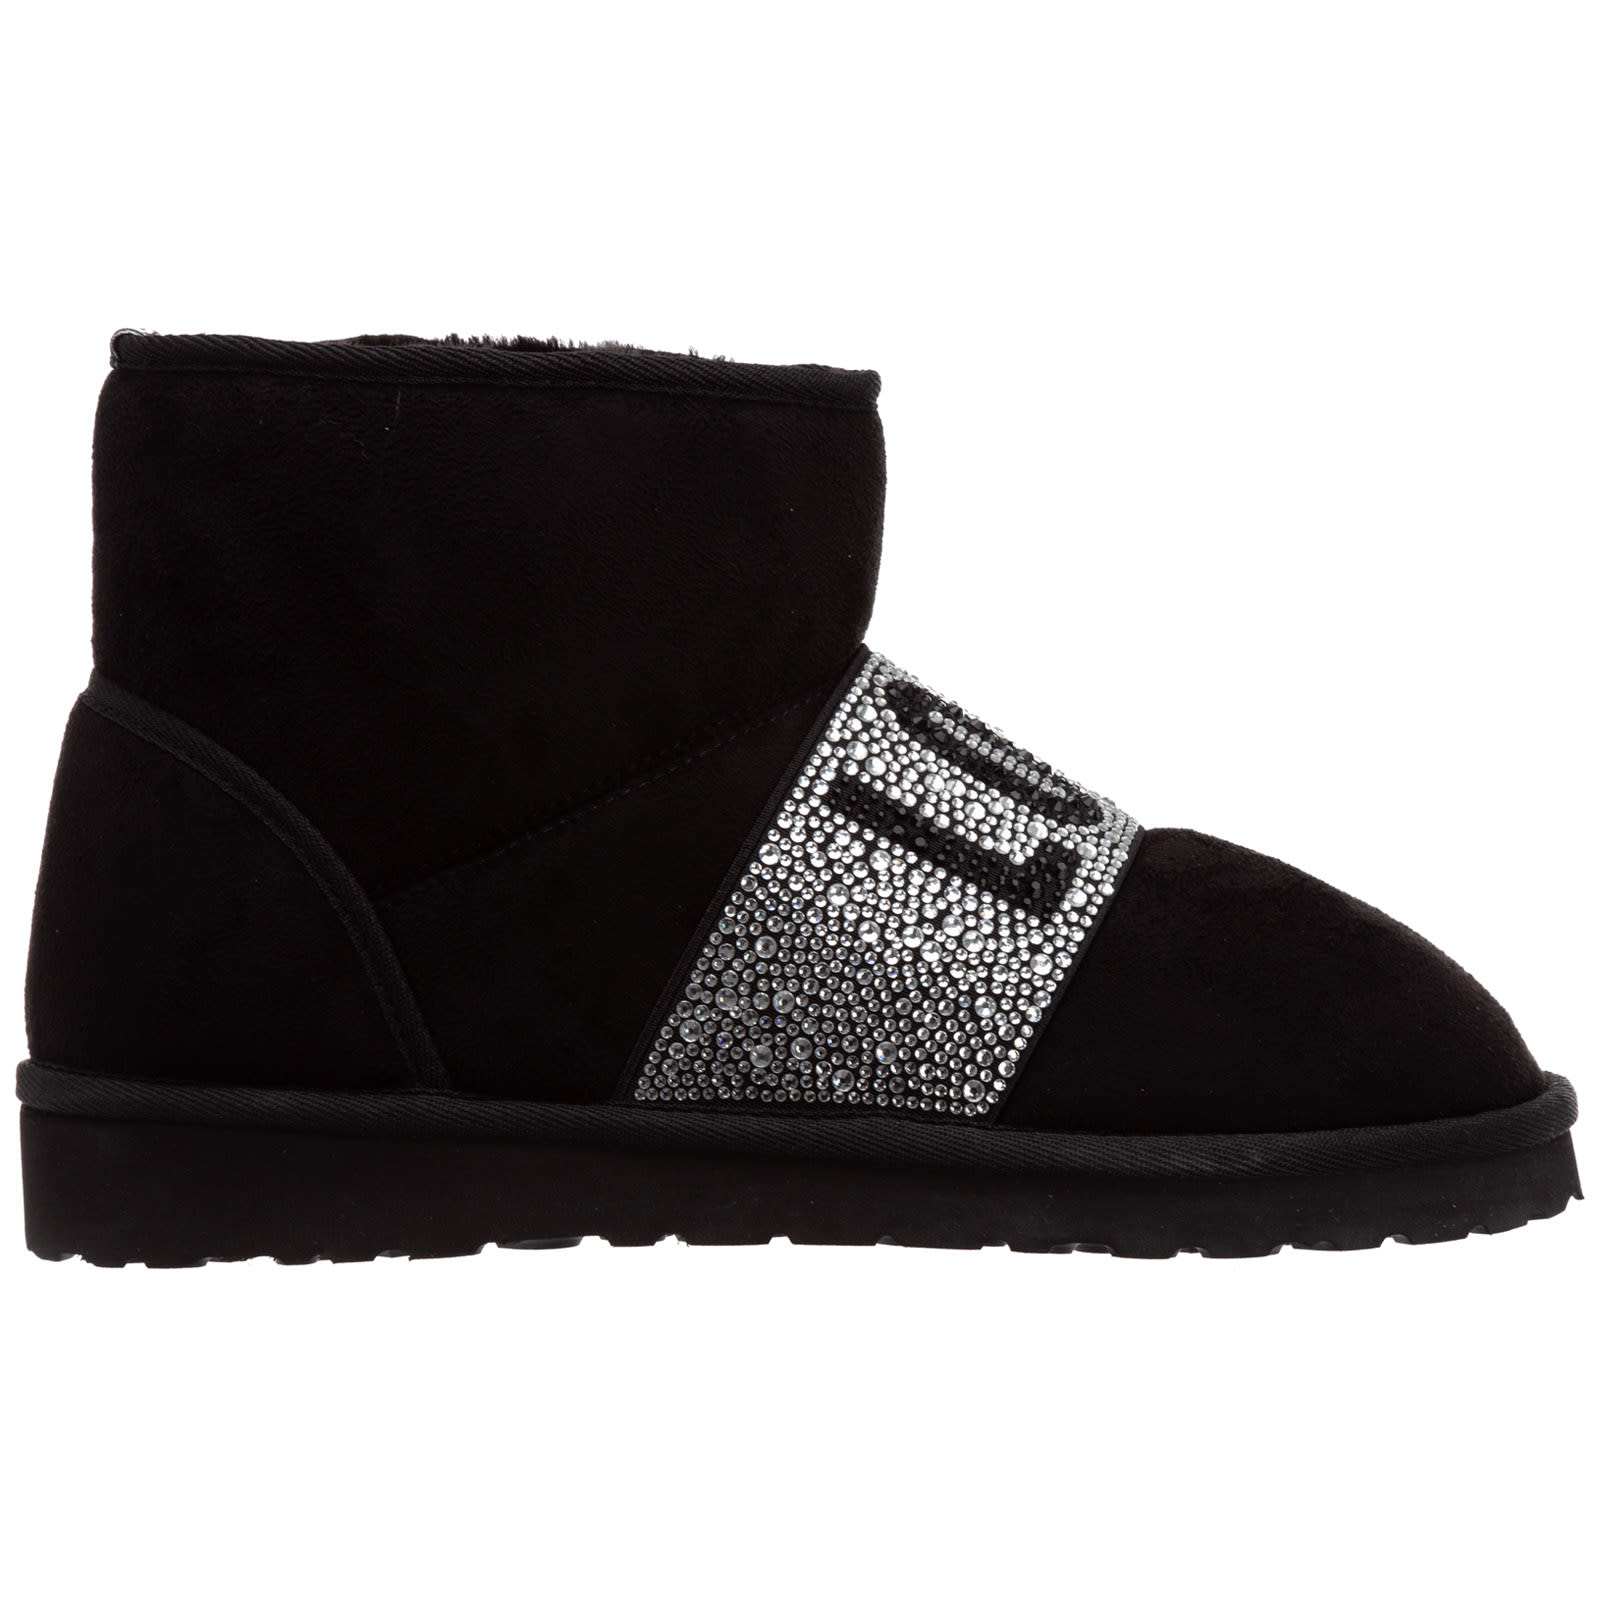 Buy Love Moschino Pure Star Ankle Boots online, shop Love Moschino shoes with free shipping